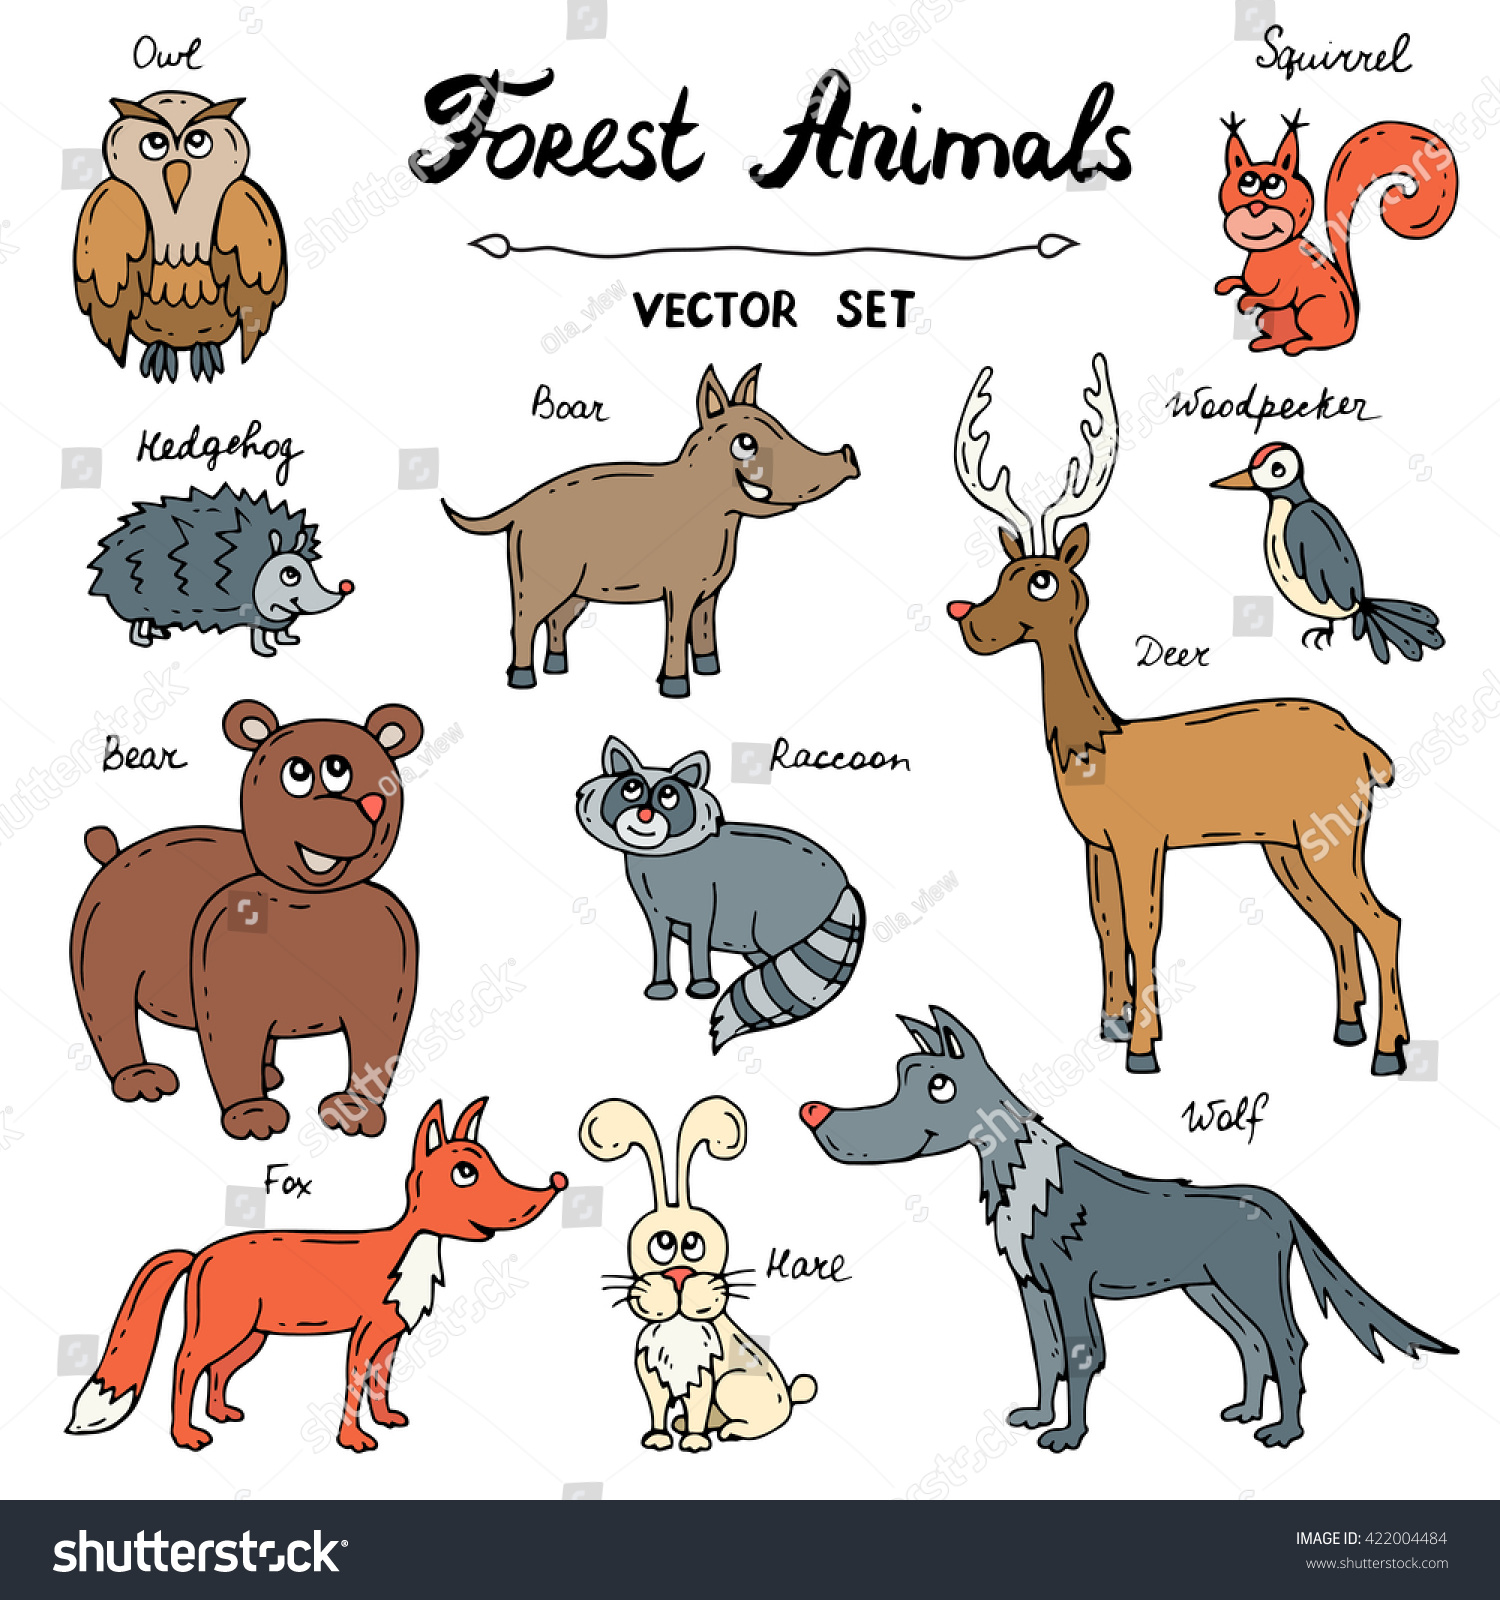 Vector Set With Hand Drawn Colored Doodles Of Forest Animals. Sketches